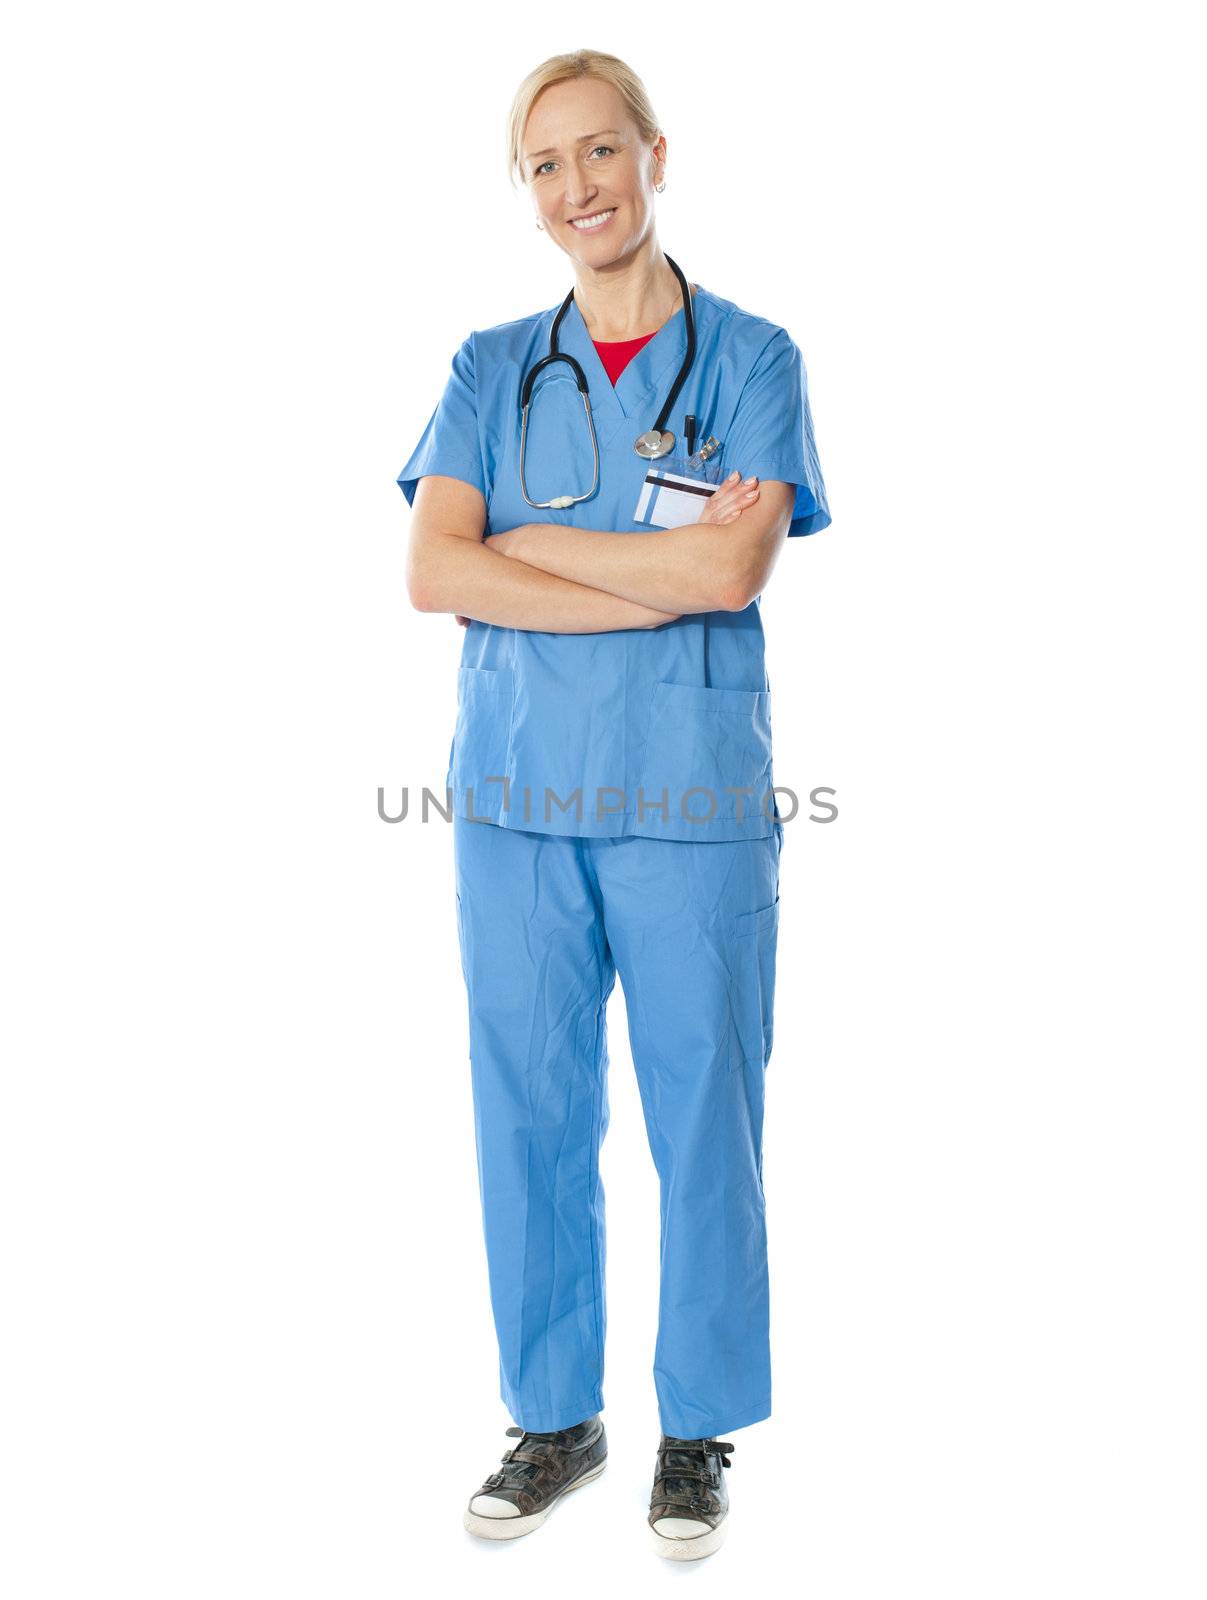 Aged medical professional posing with stethoscope around her neck looking at camera